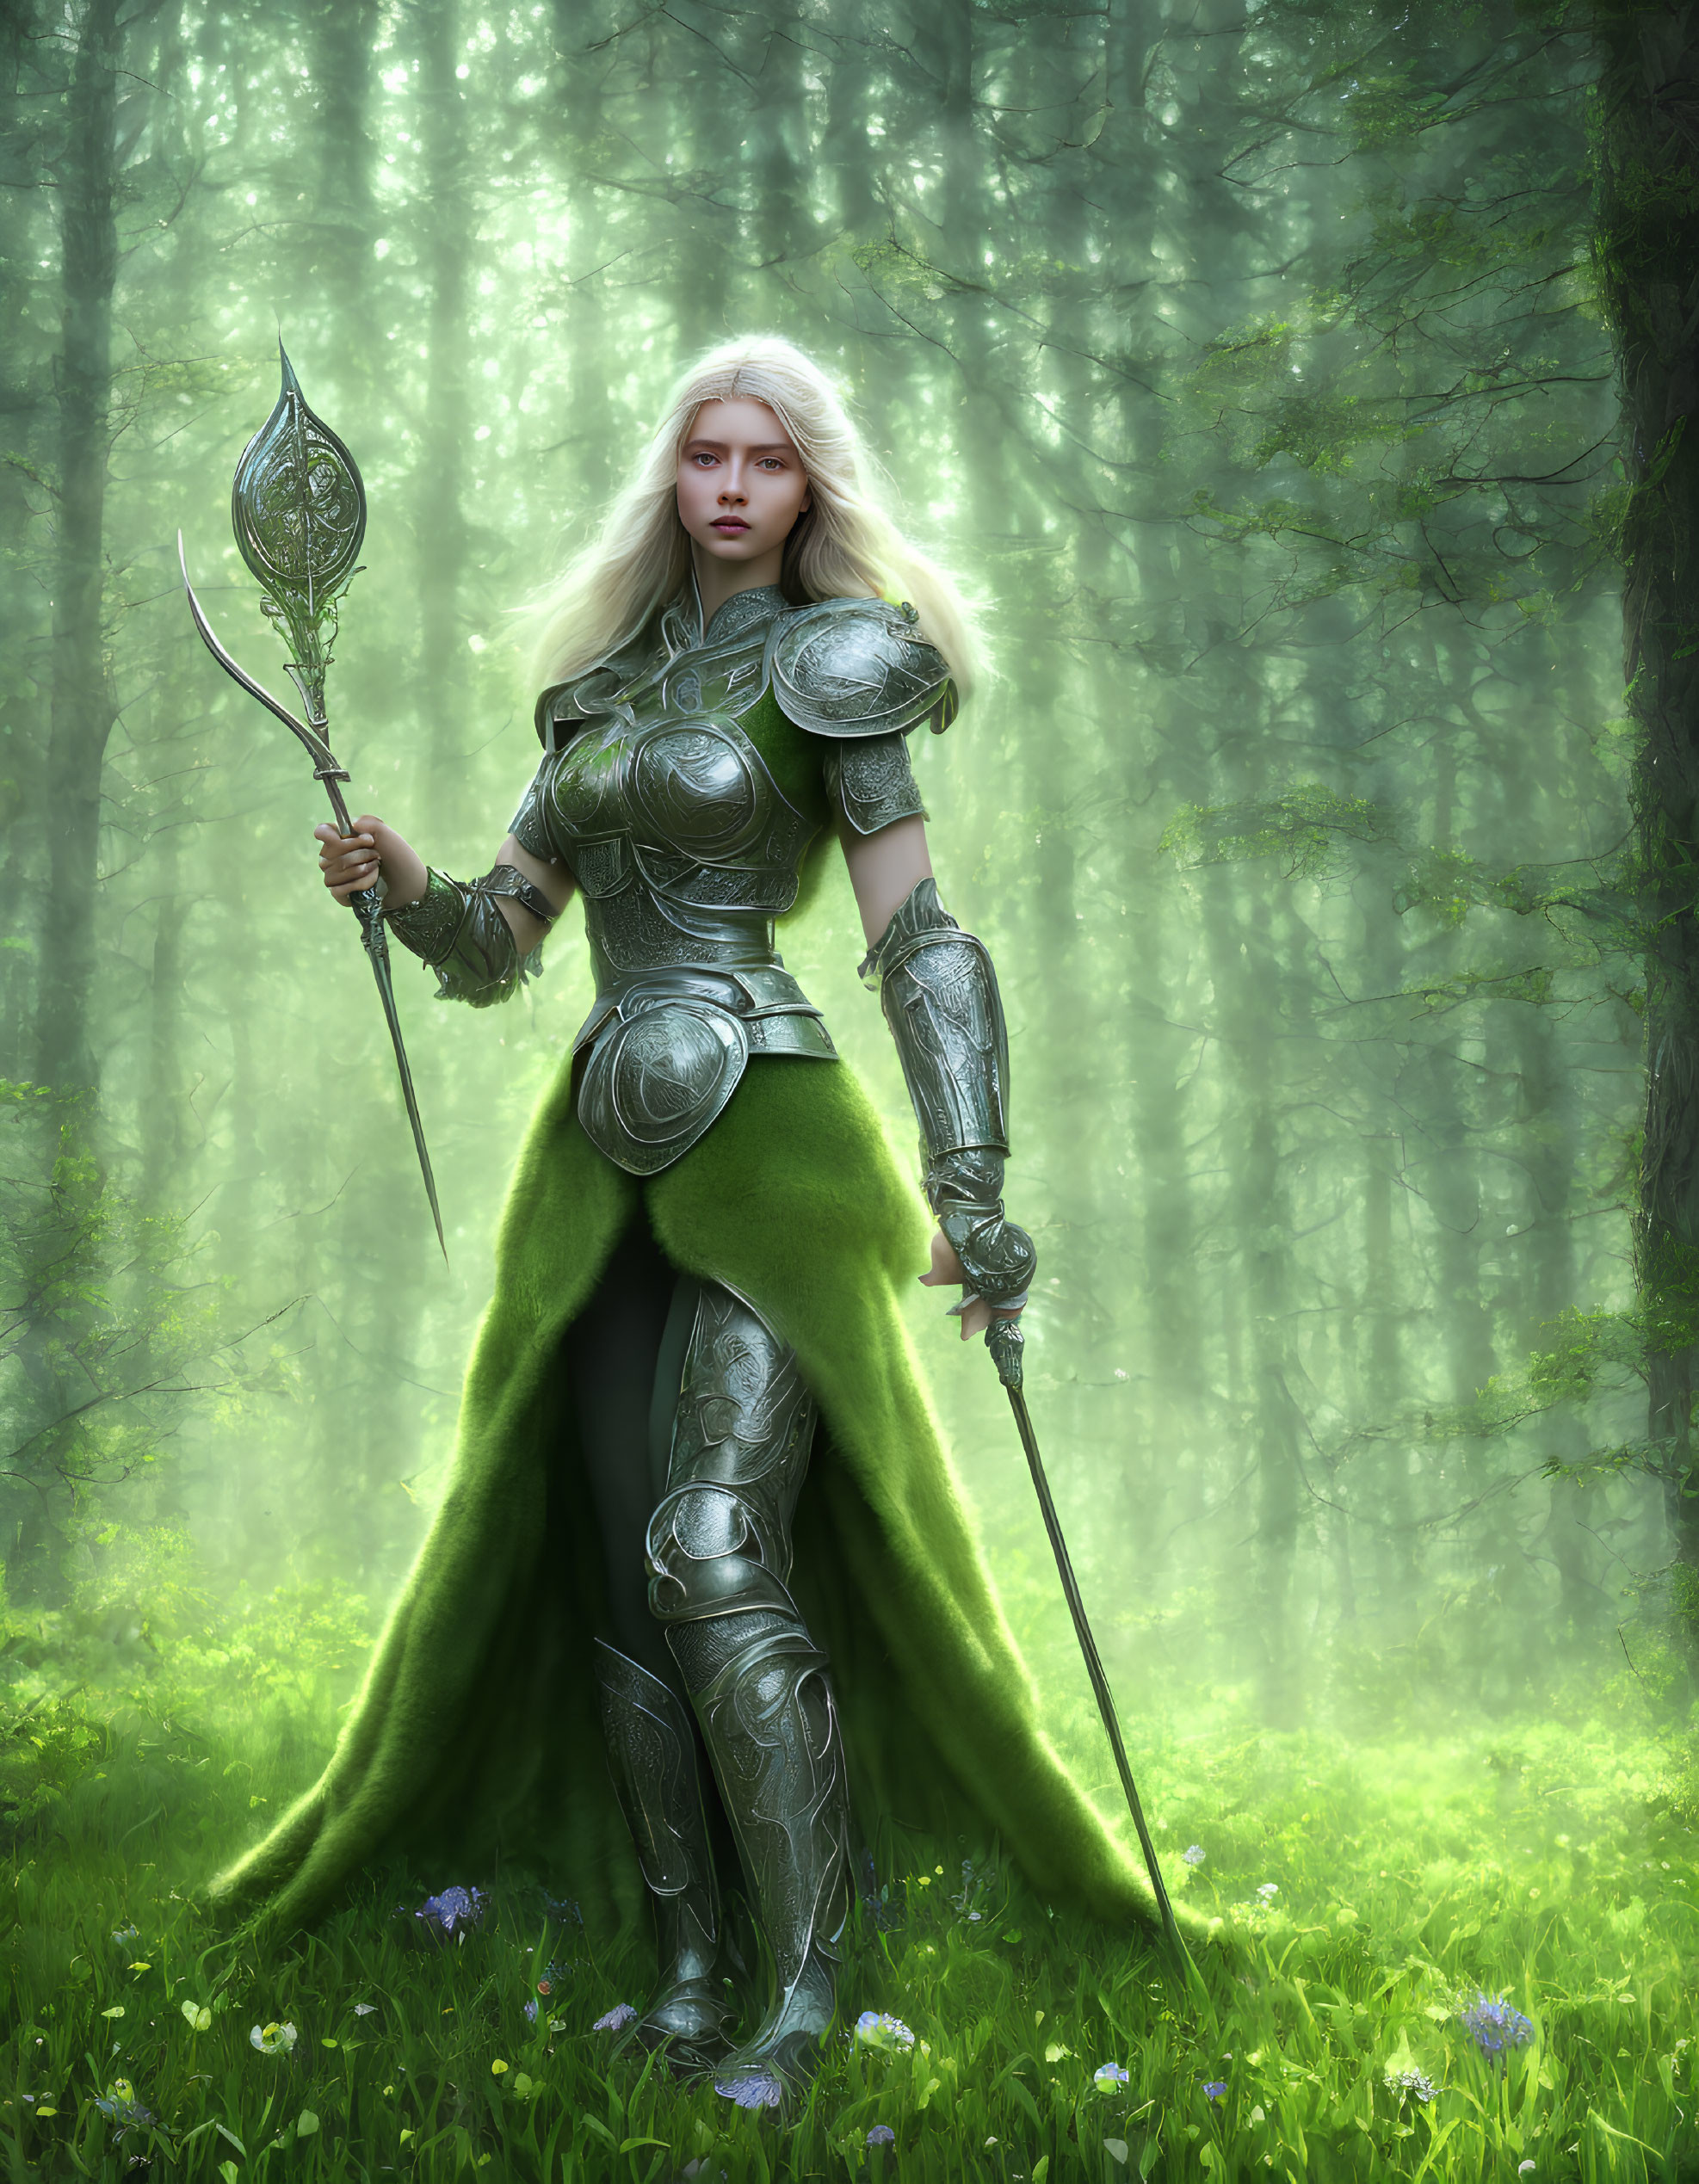 Armored female warrior with spear in misty green forest